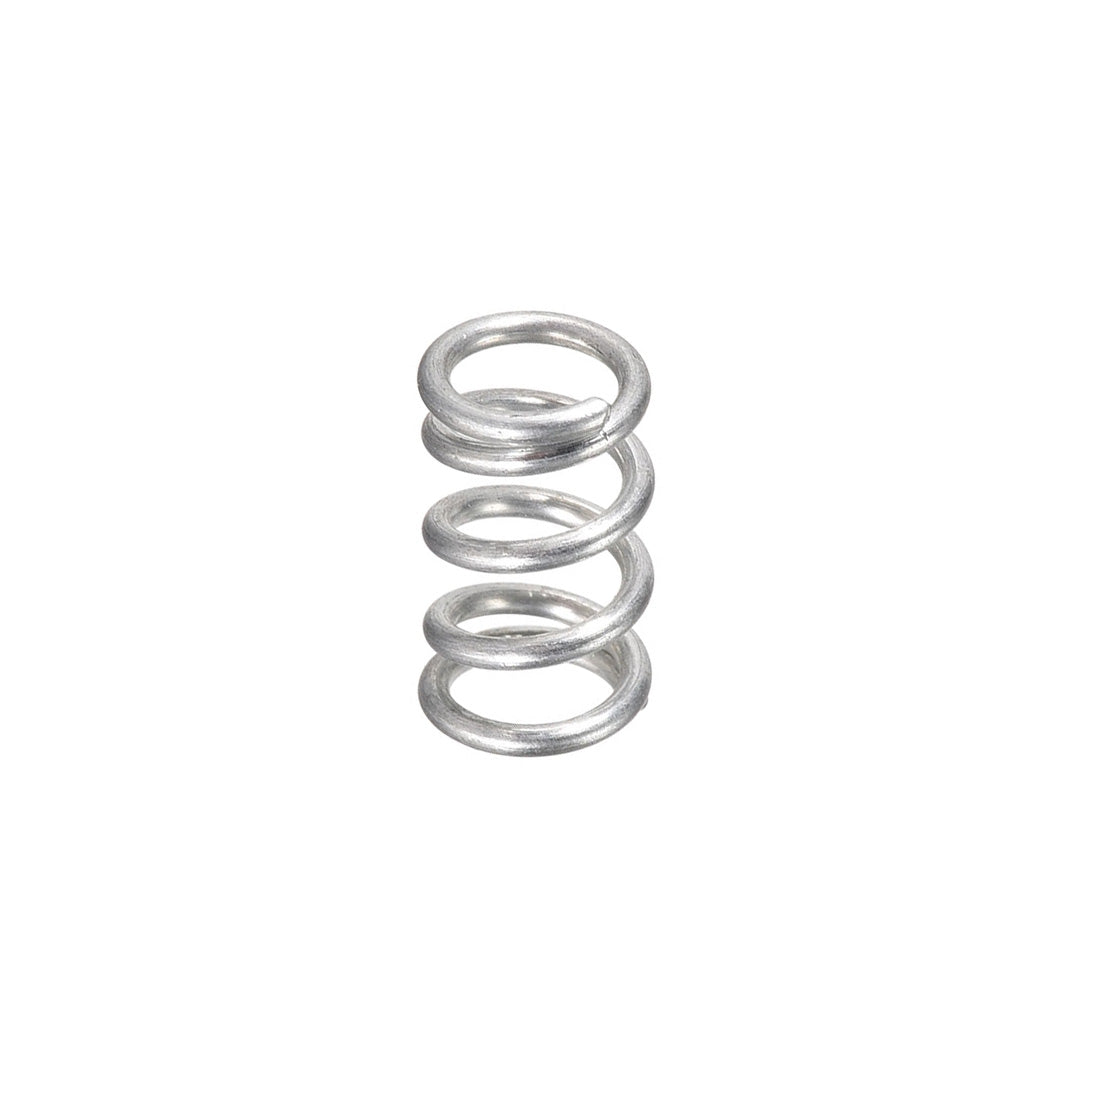 Uxcell Uxcell Heated Bed Springs for 3D Printer Extruder Compression Spring, 7 x 12mm 10pcs